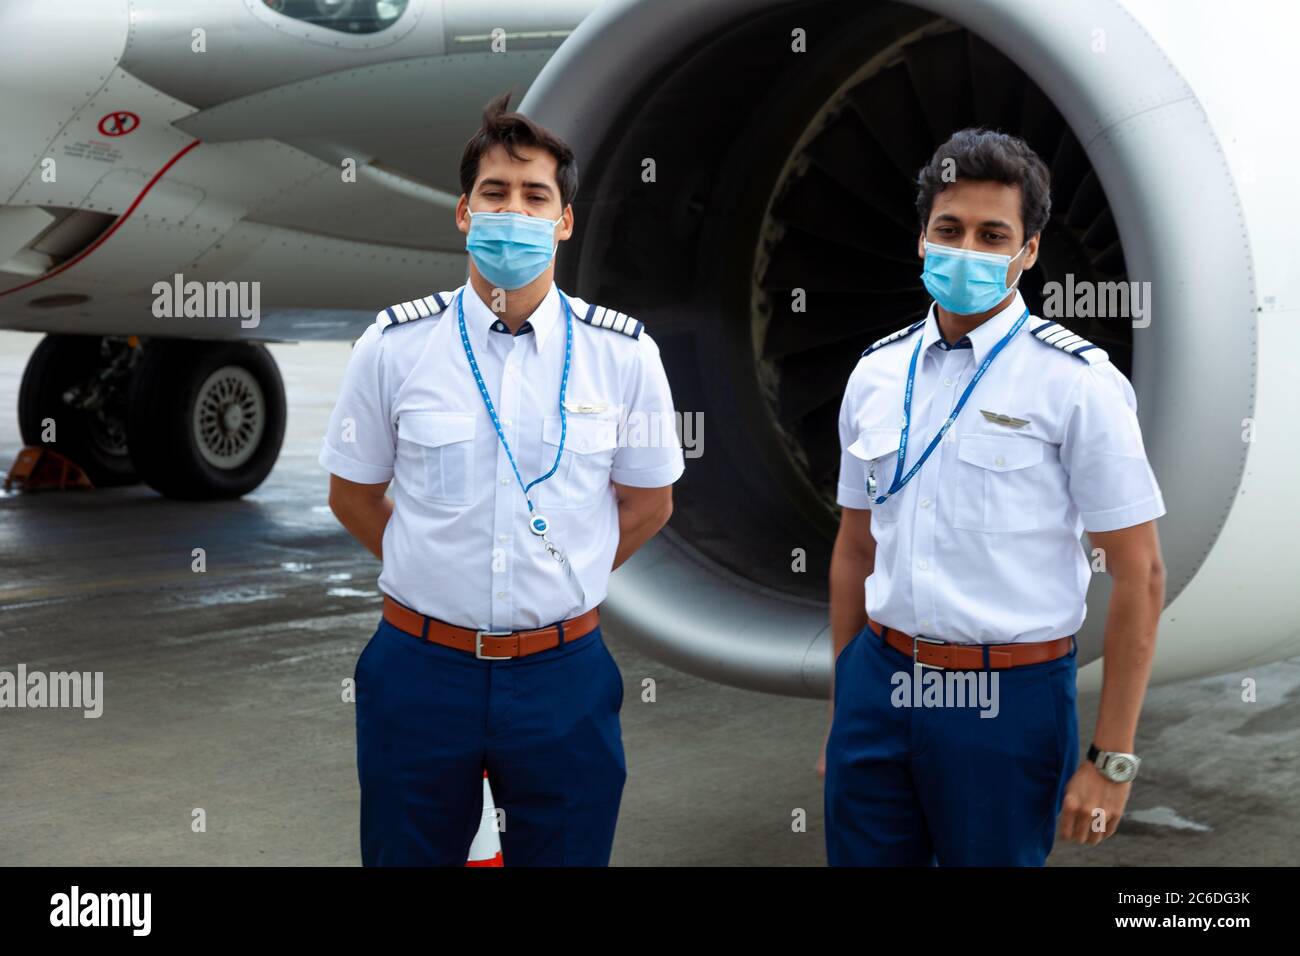 Ukraine, Kyiv - July 8, 2020: Personnel - captains, pilots and flight  attendants in medical masks. Passenger aircraft Boeing 737-800 Flydubai  Airlines Stock Photo - Alamy